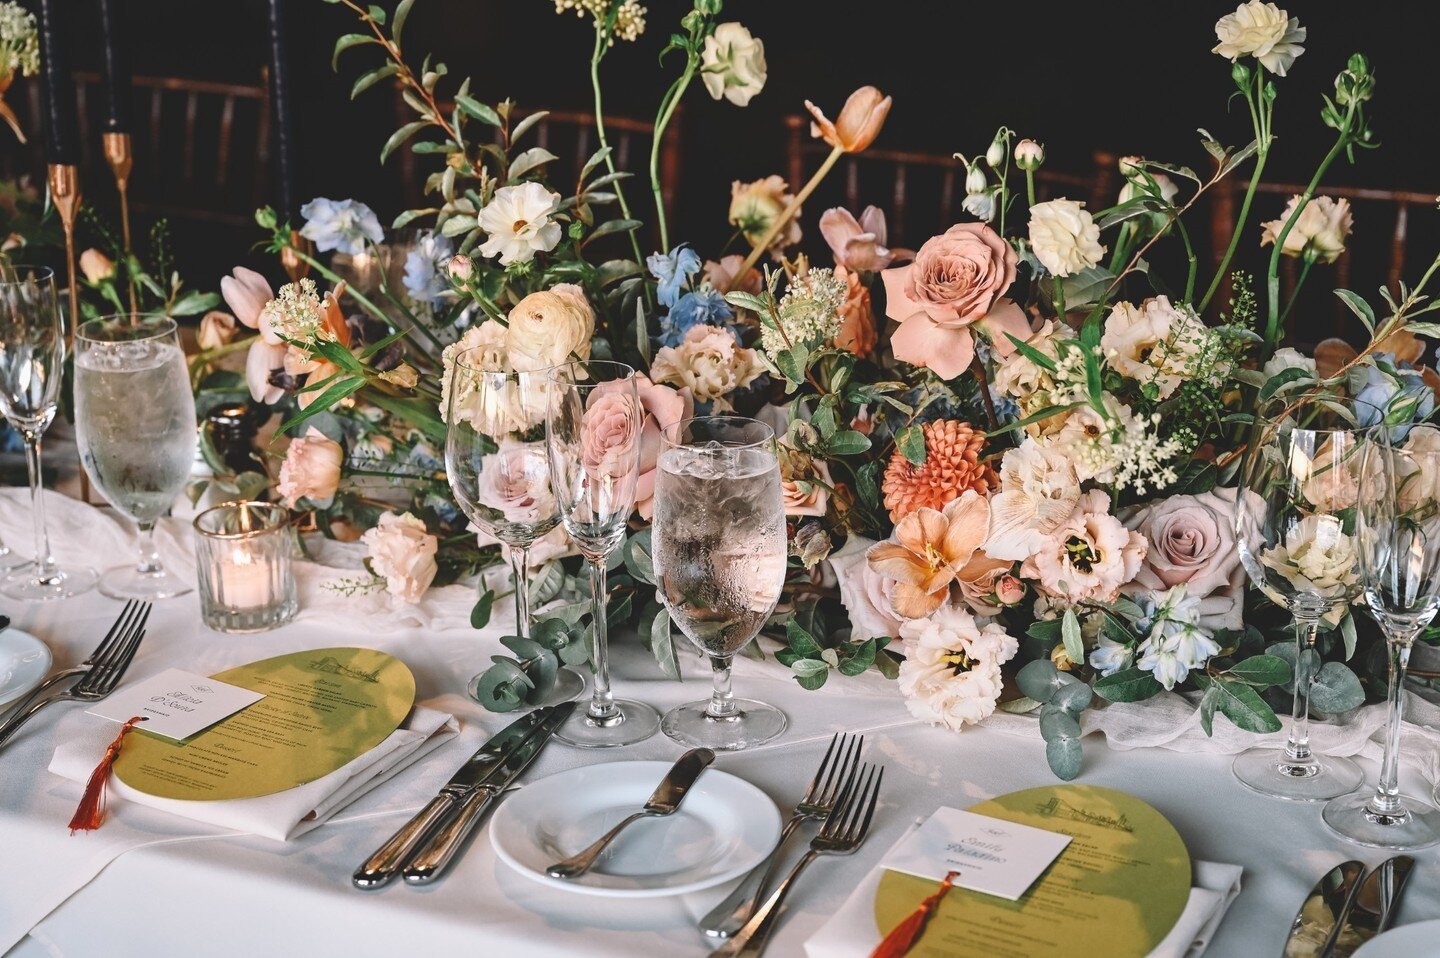 Some happy spring florals to remind those of us in New York that warm weather is just around the corner (...right?!) ☀️

Planning: @veronicajoyevents
Photography: @robertcarlonewyork
Florals: @oneflowerbyl
Paper &amp; Signage: @jubileepaper
Venue: @t